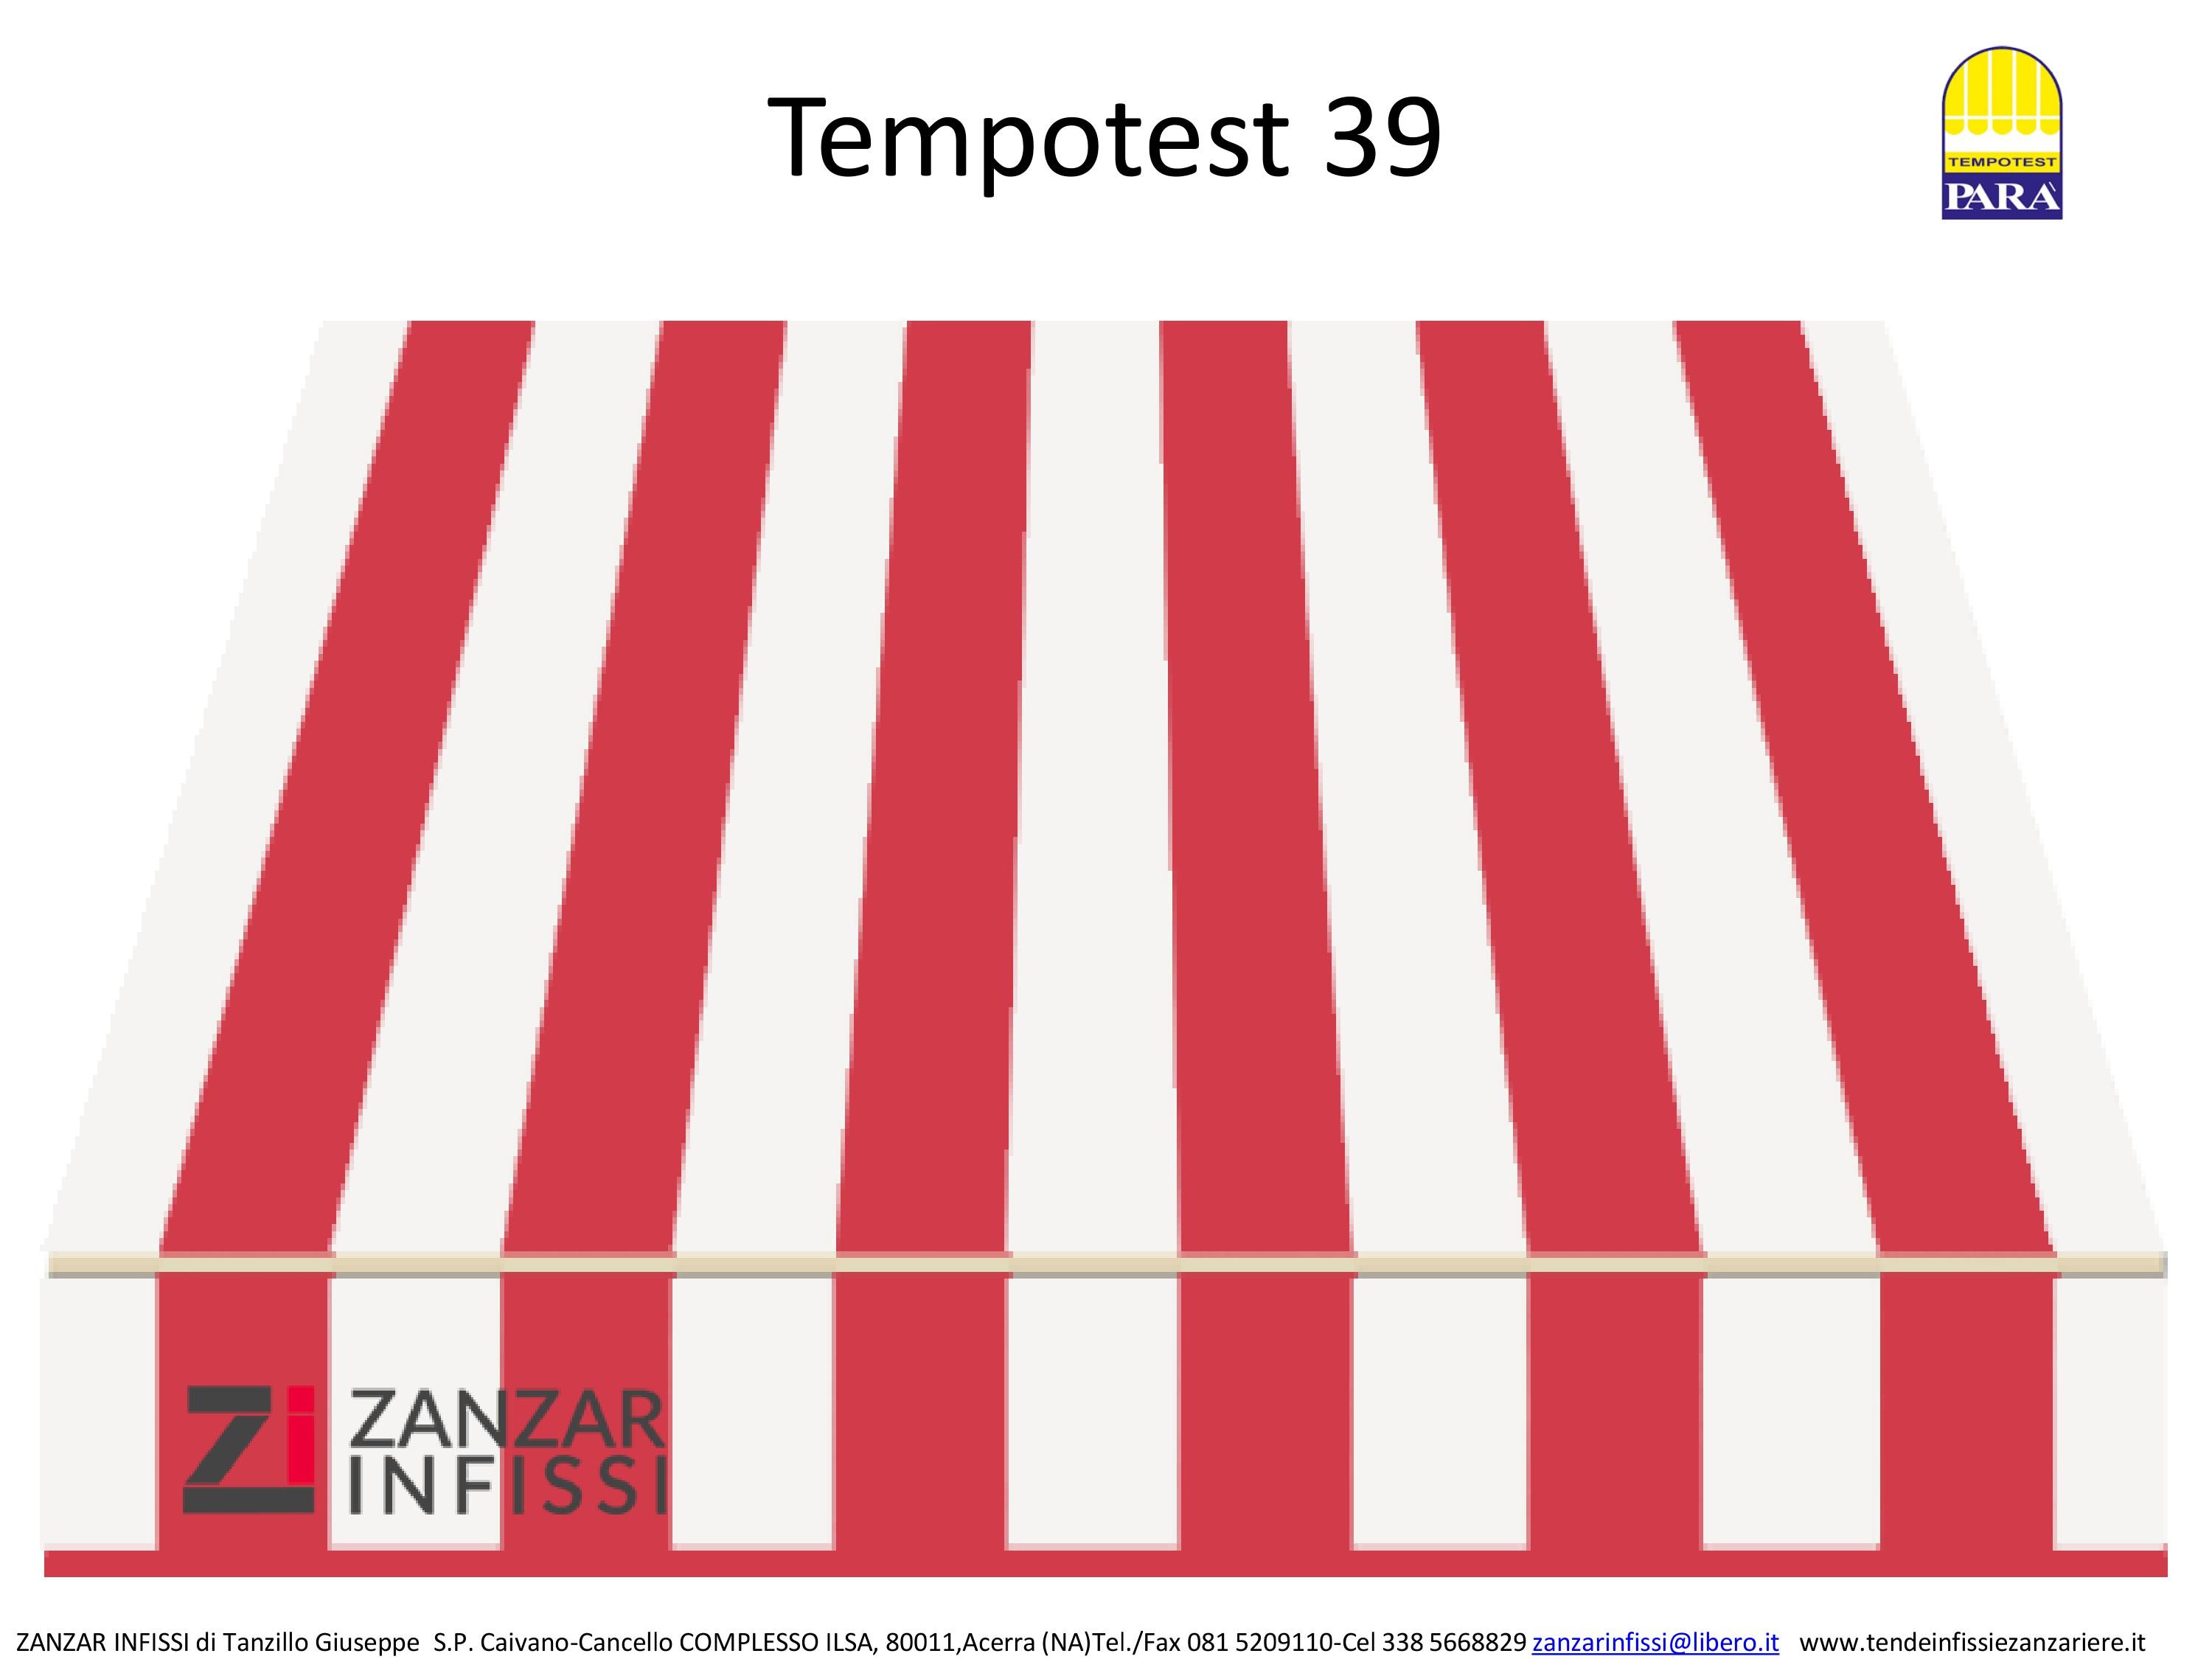 Tempotest 39